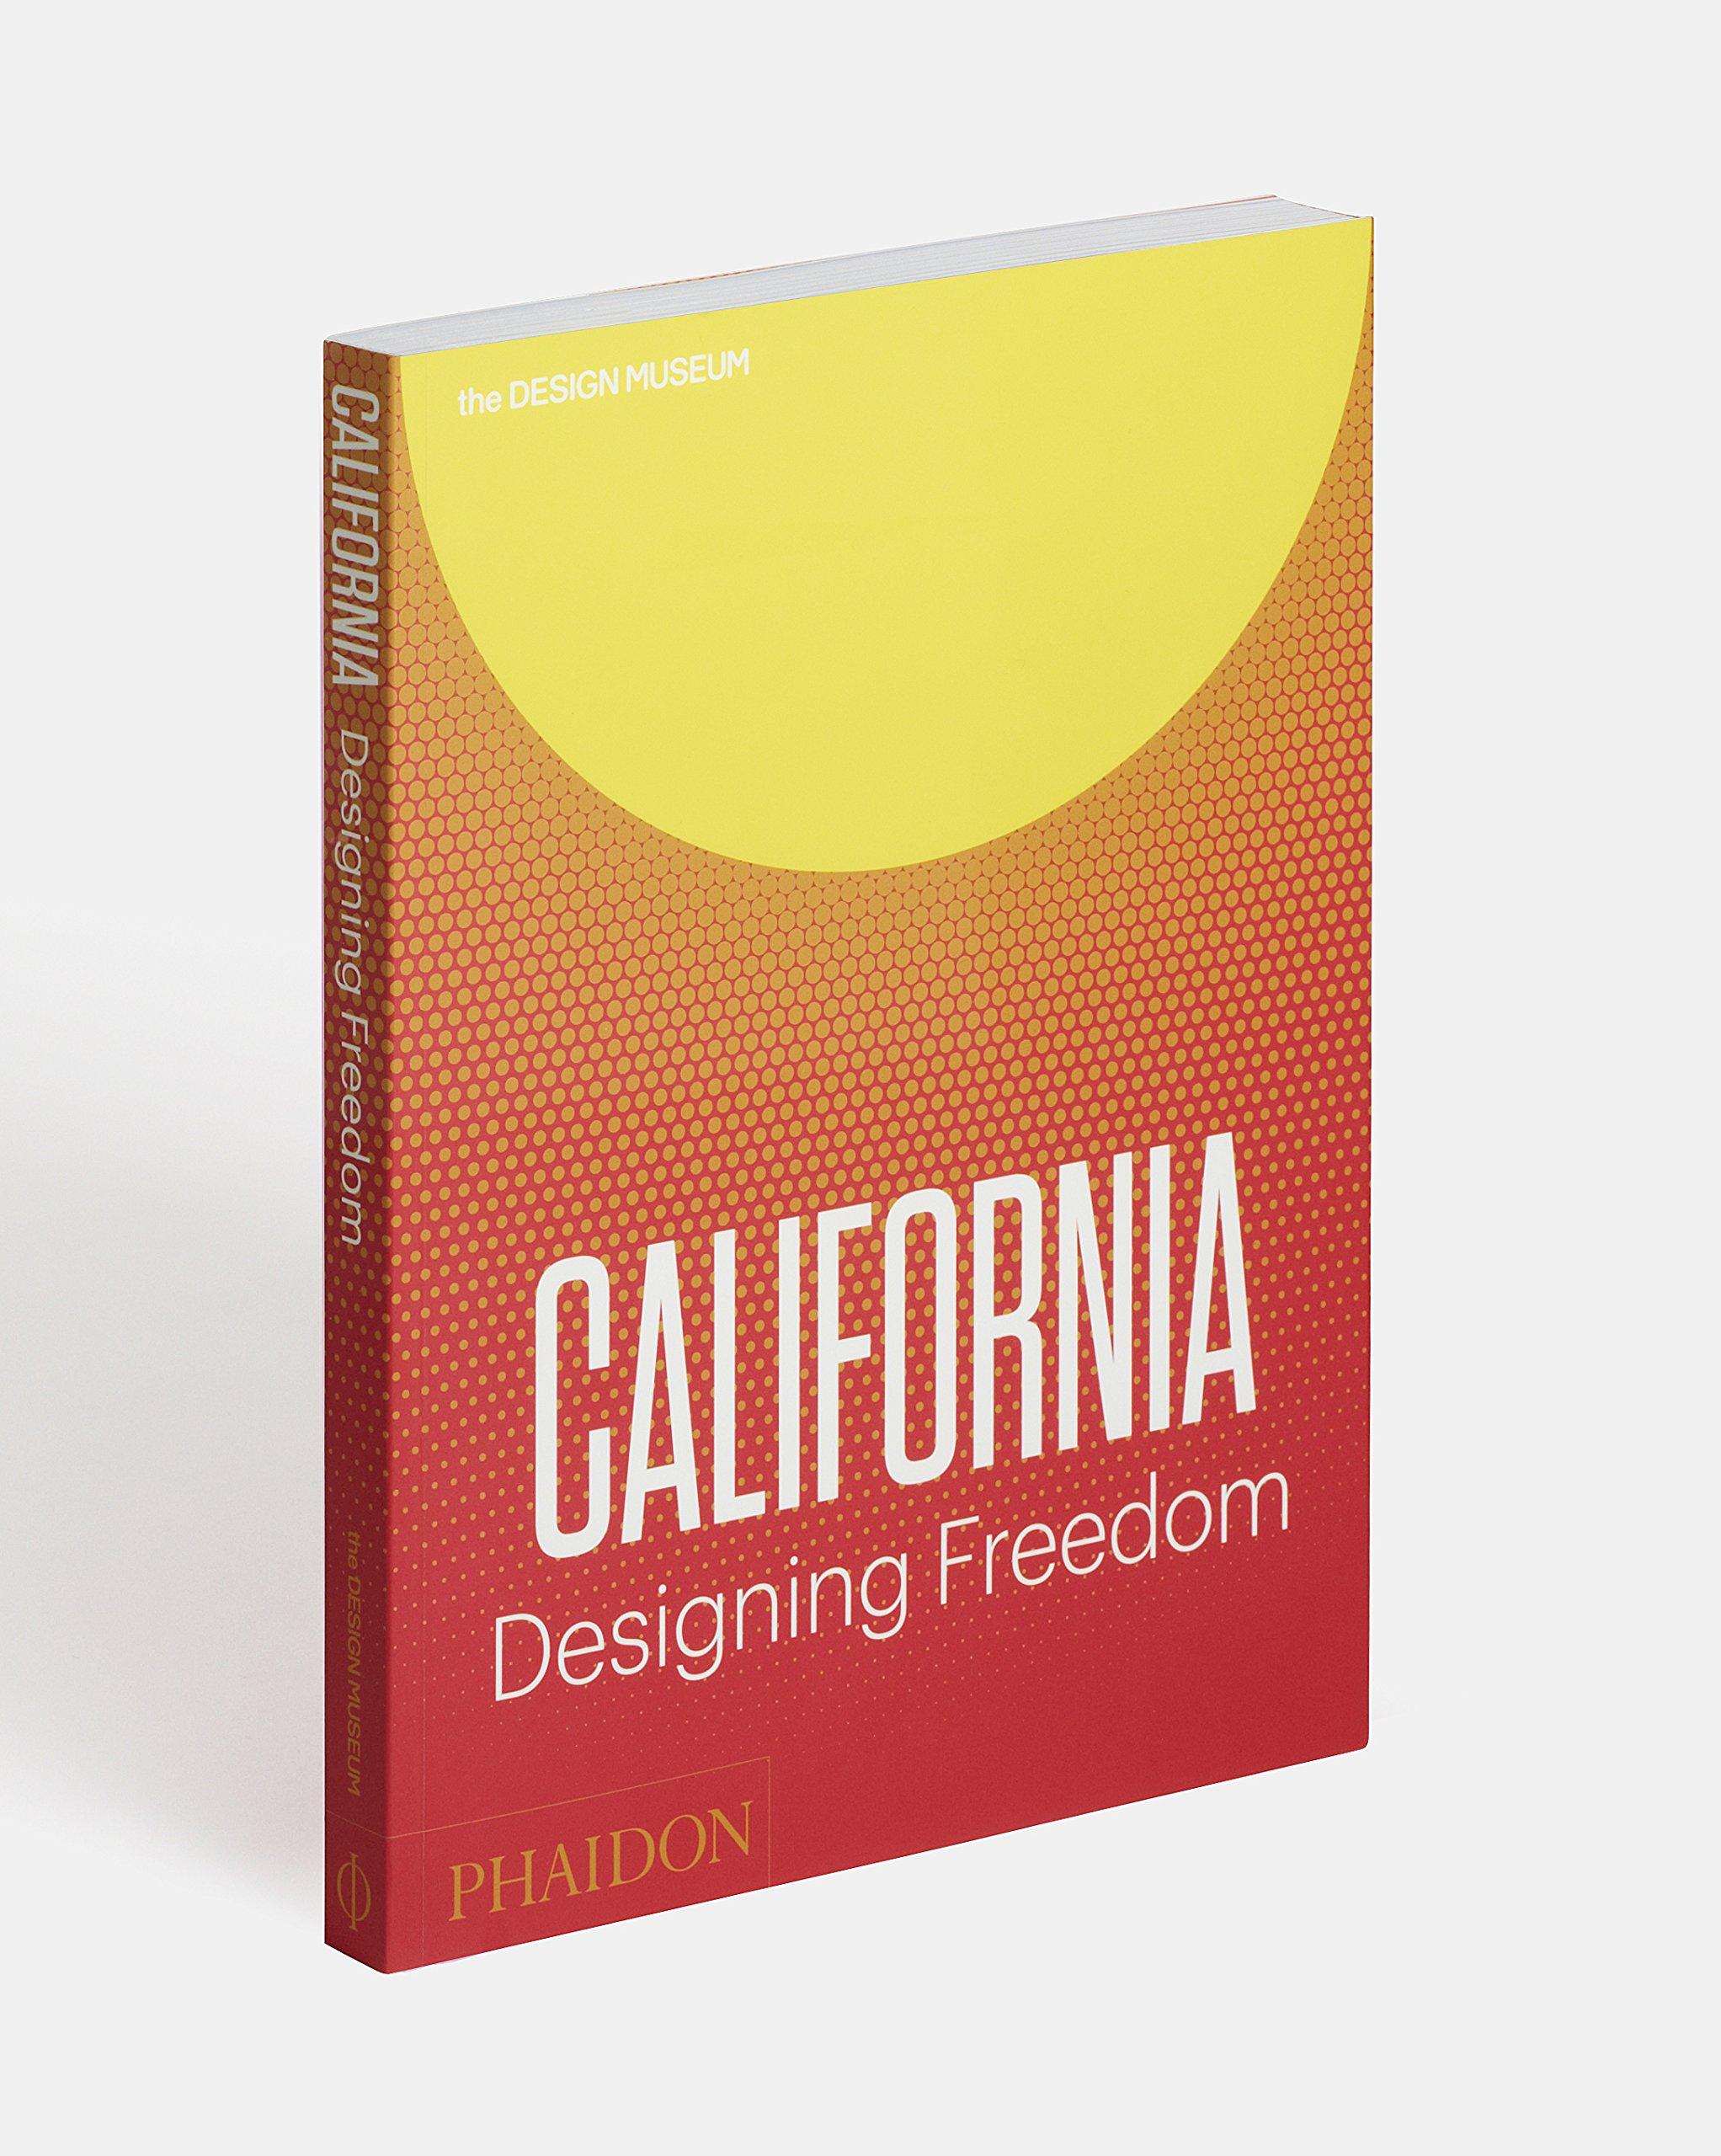 California Designing Freedom by Justin McGuirk & Brendan McGetrick

This book examines California's enormous impact on contemporary design, from the counterculture of the 1960s to the tech culture of Silicon Valley. On a more expansive level,